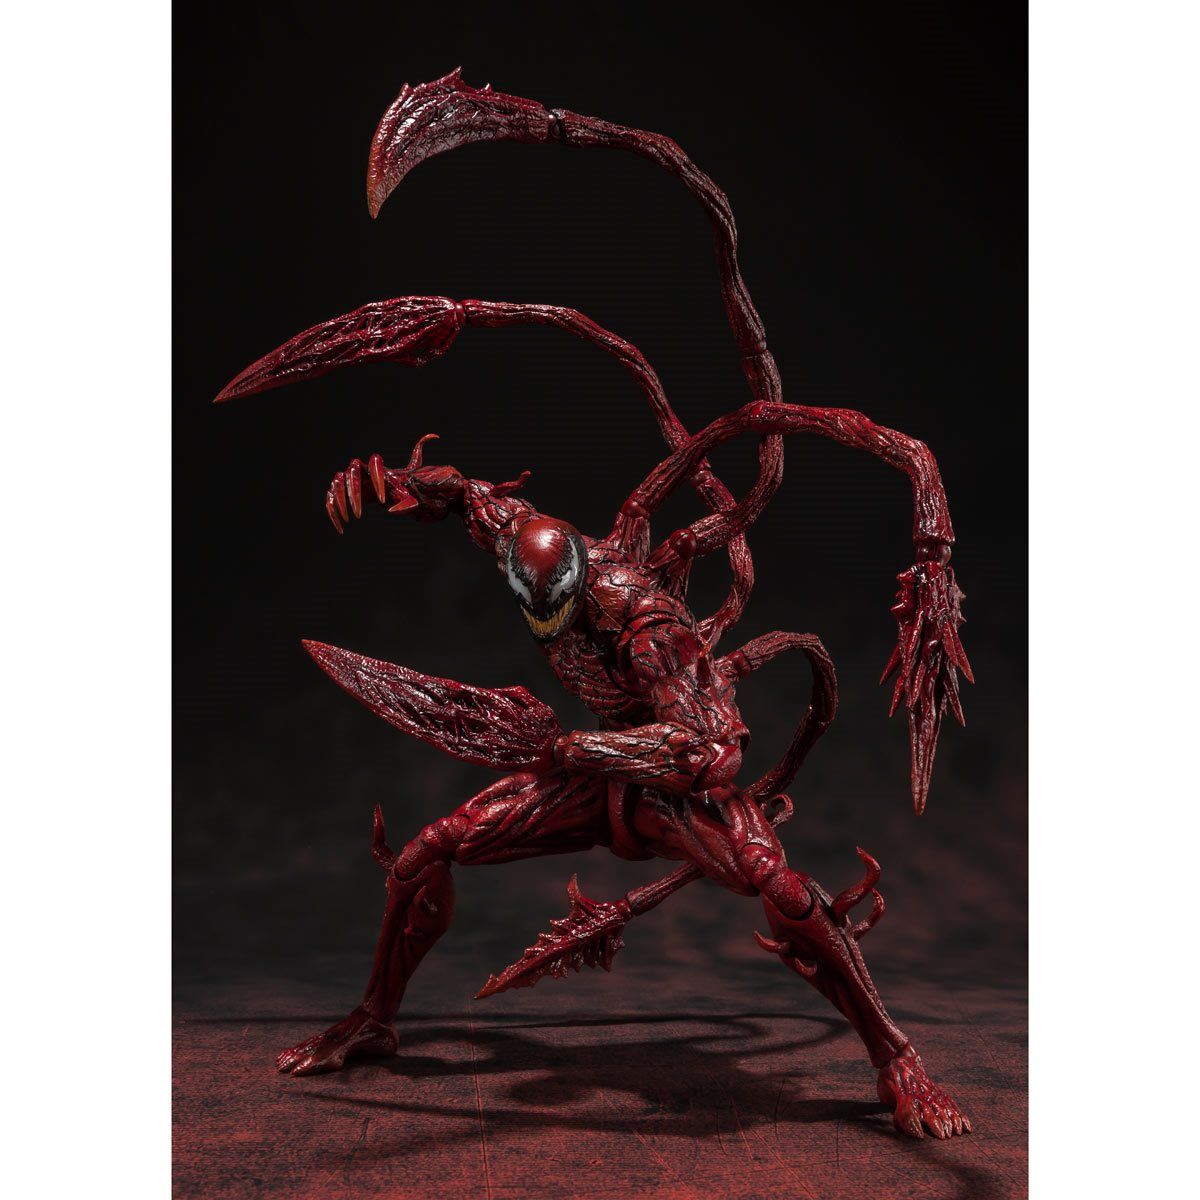 SH Figuarts Venom Let There Be Carnage Movie: Carnage Aksiyon Figür